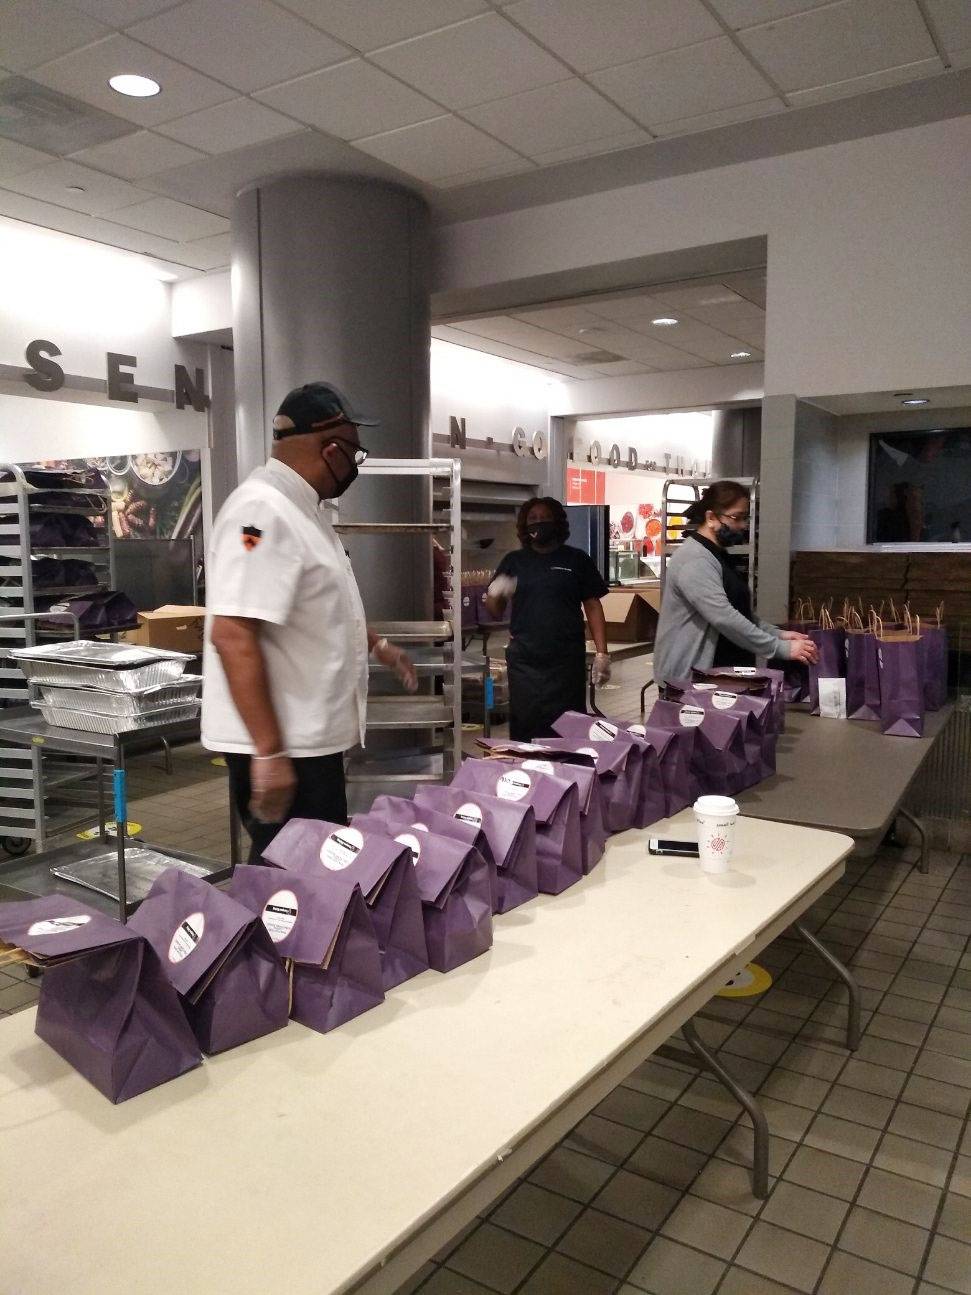 Campus Dining workers line up packages of food to be delivered